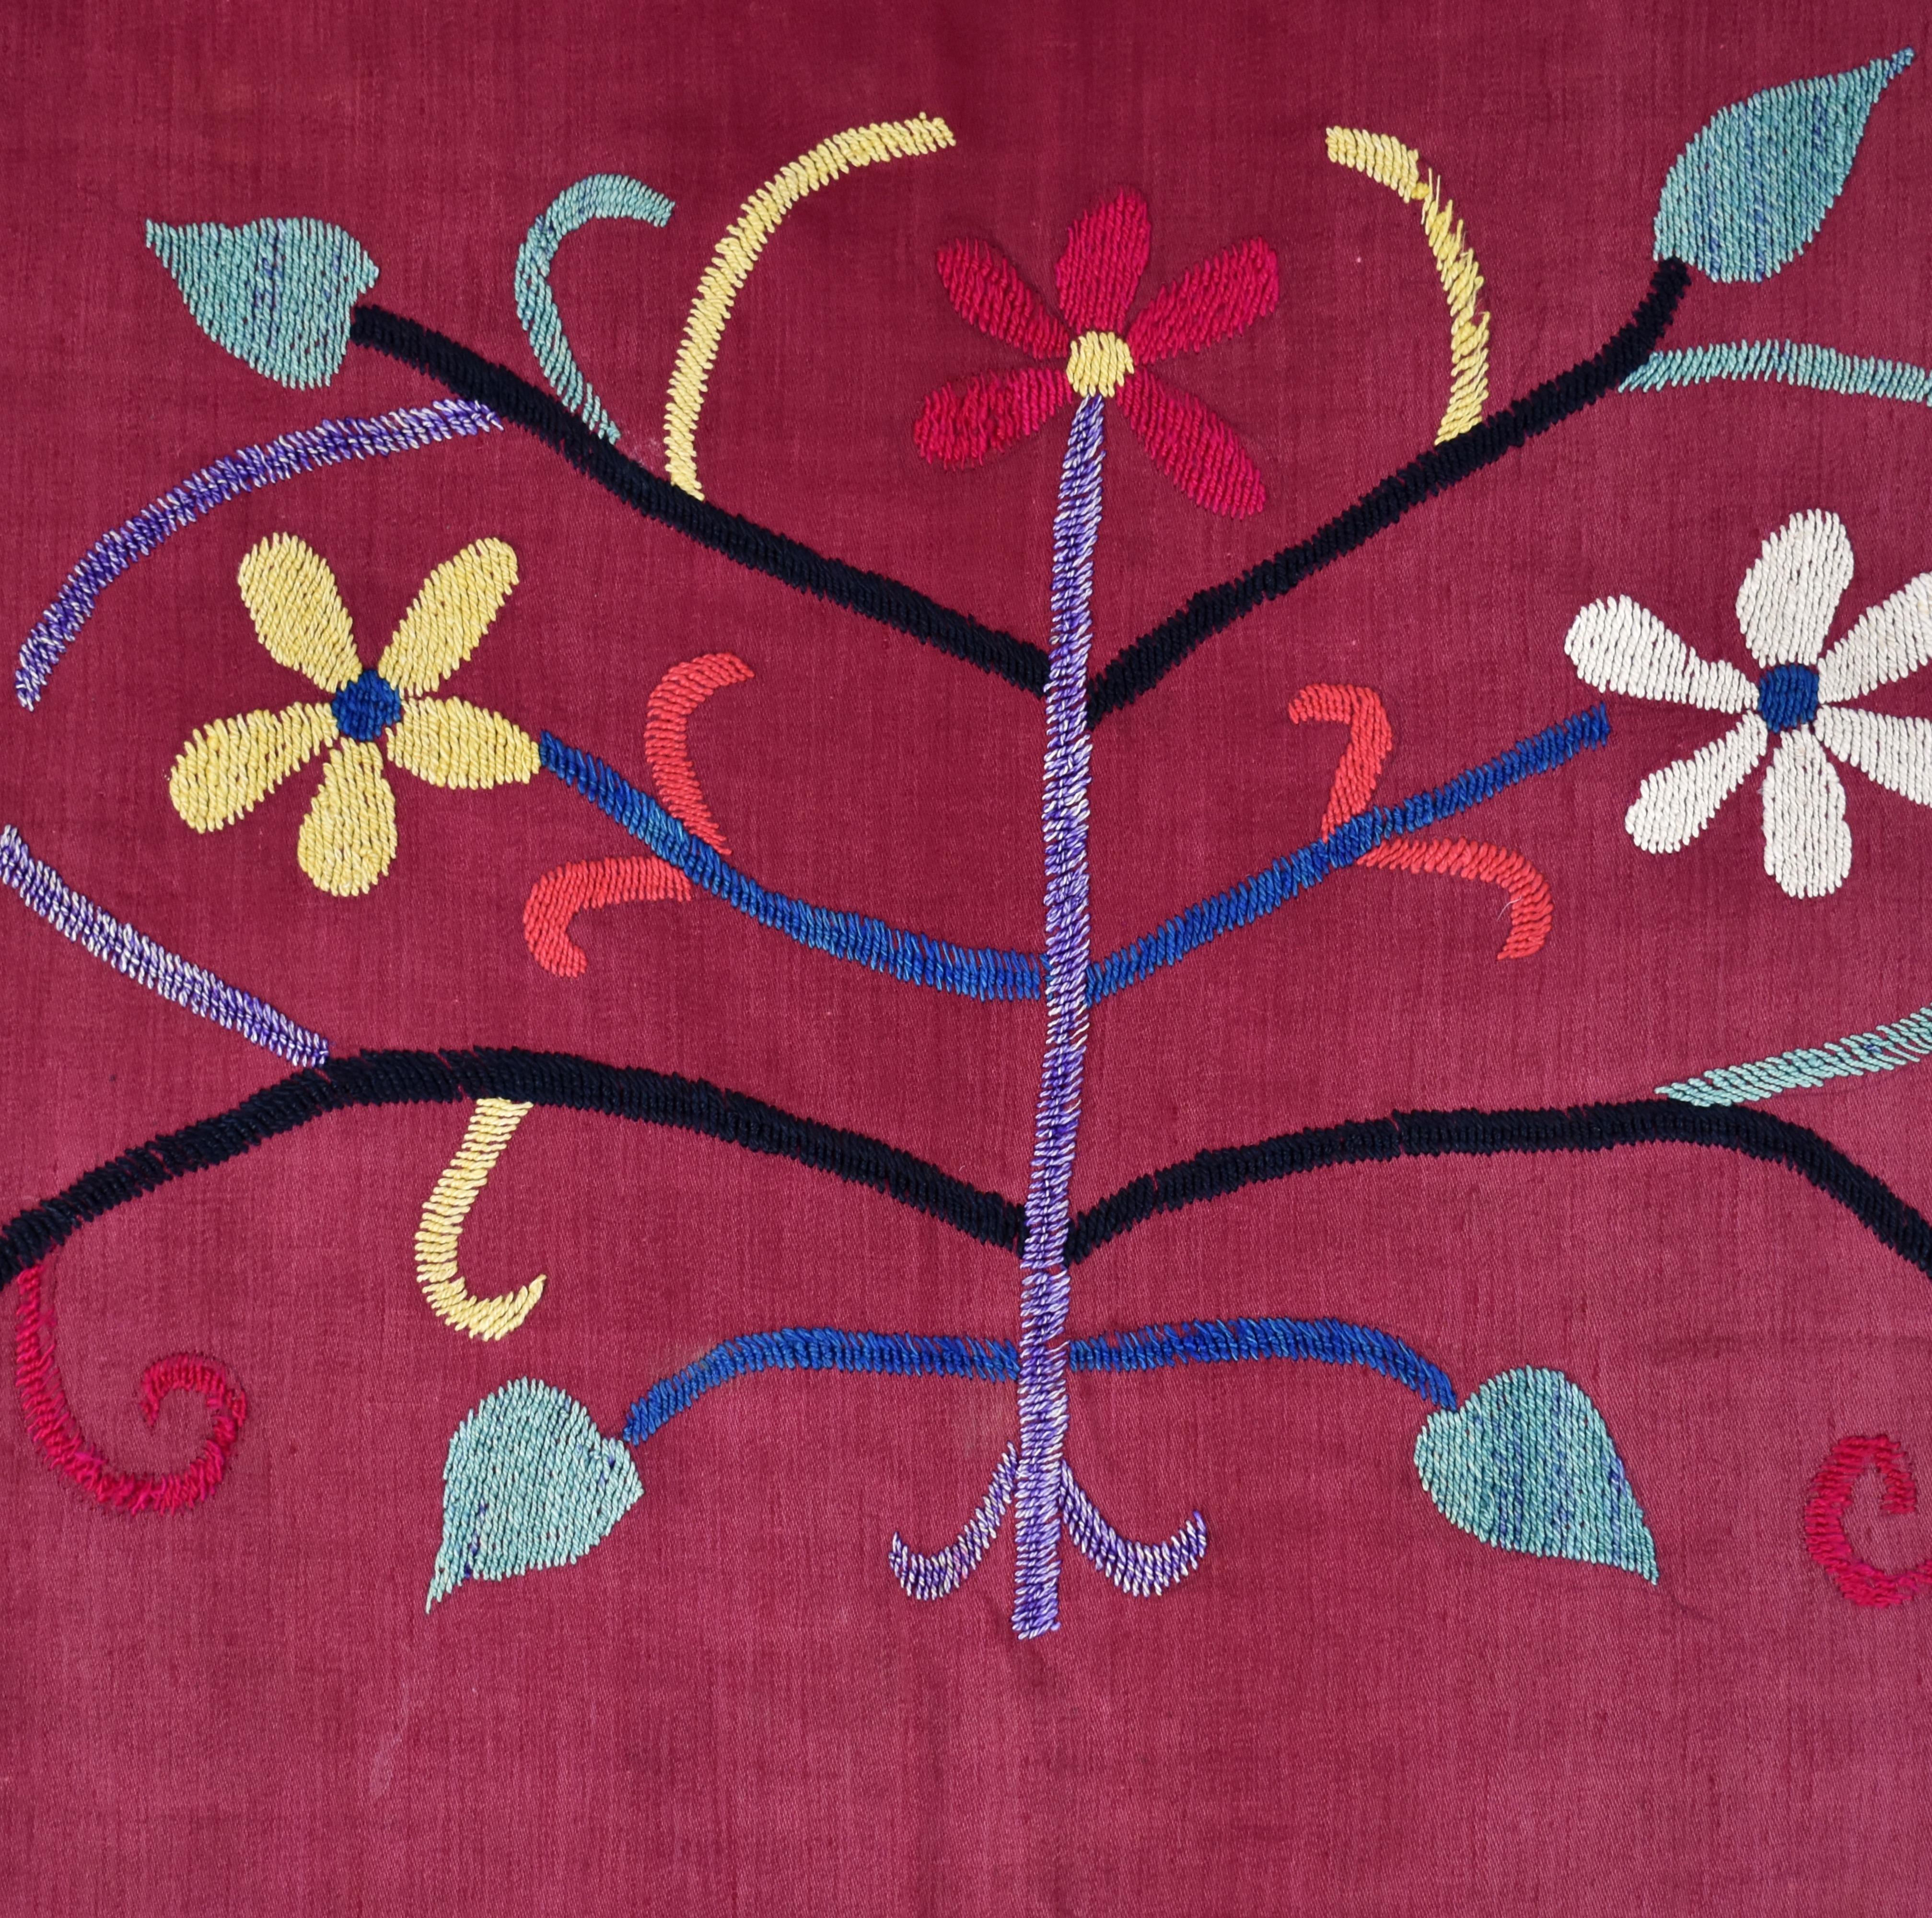 Embroidered Lakai Wall Hanging, Mid 20th Century For Sale